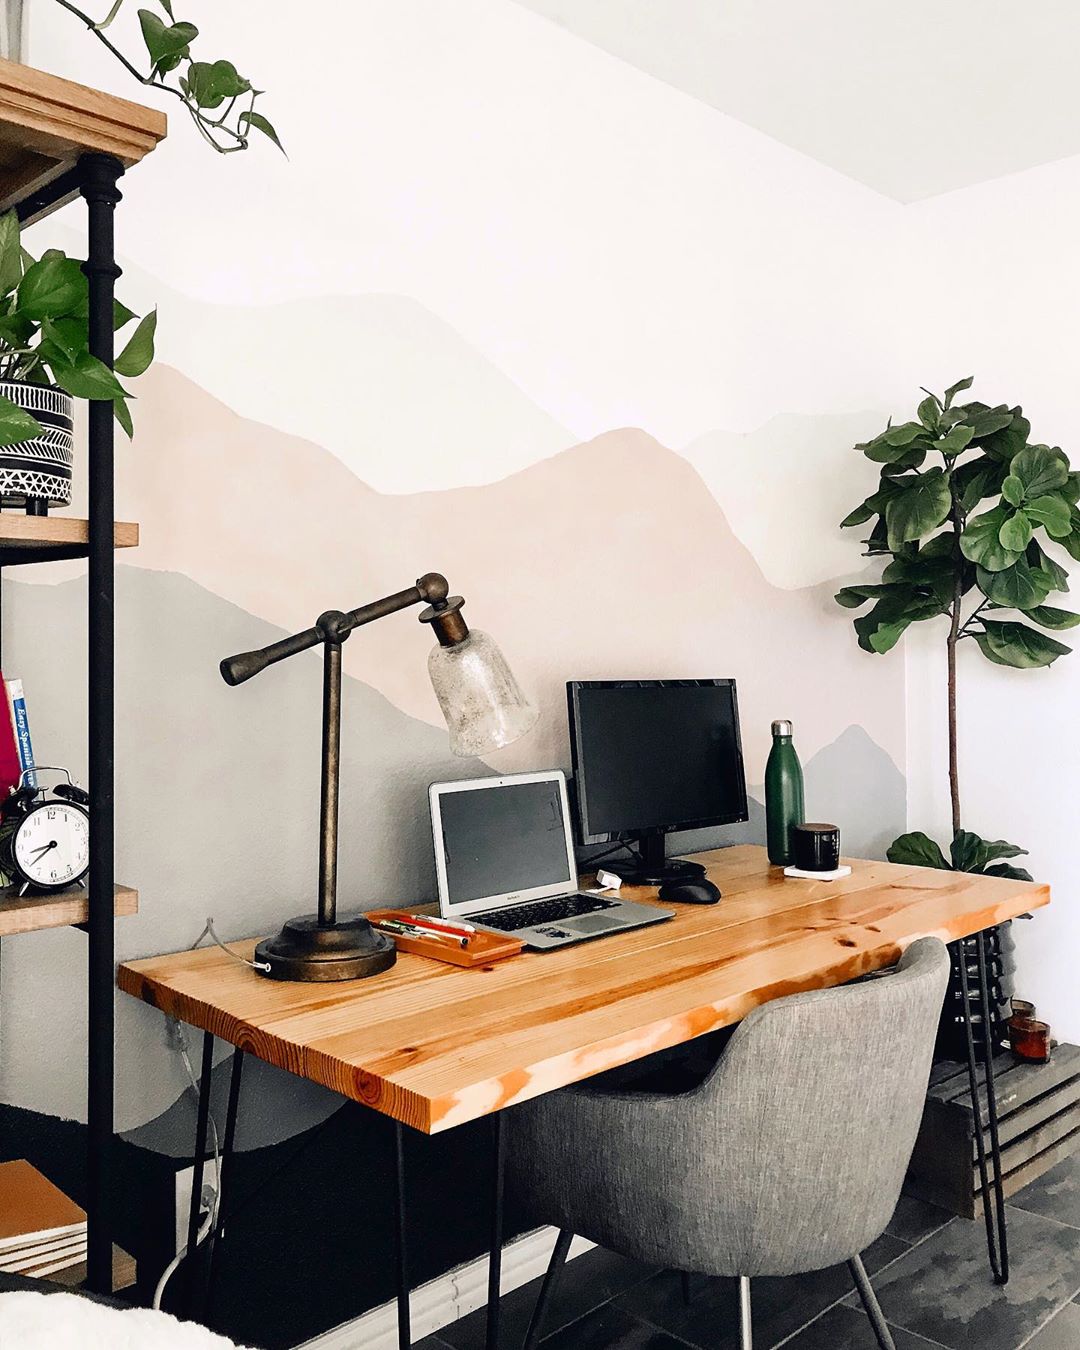 How to Work From Home: 12 Tips for Your Home Office